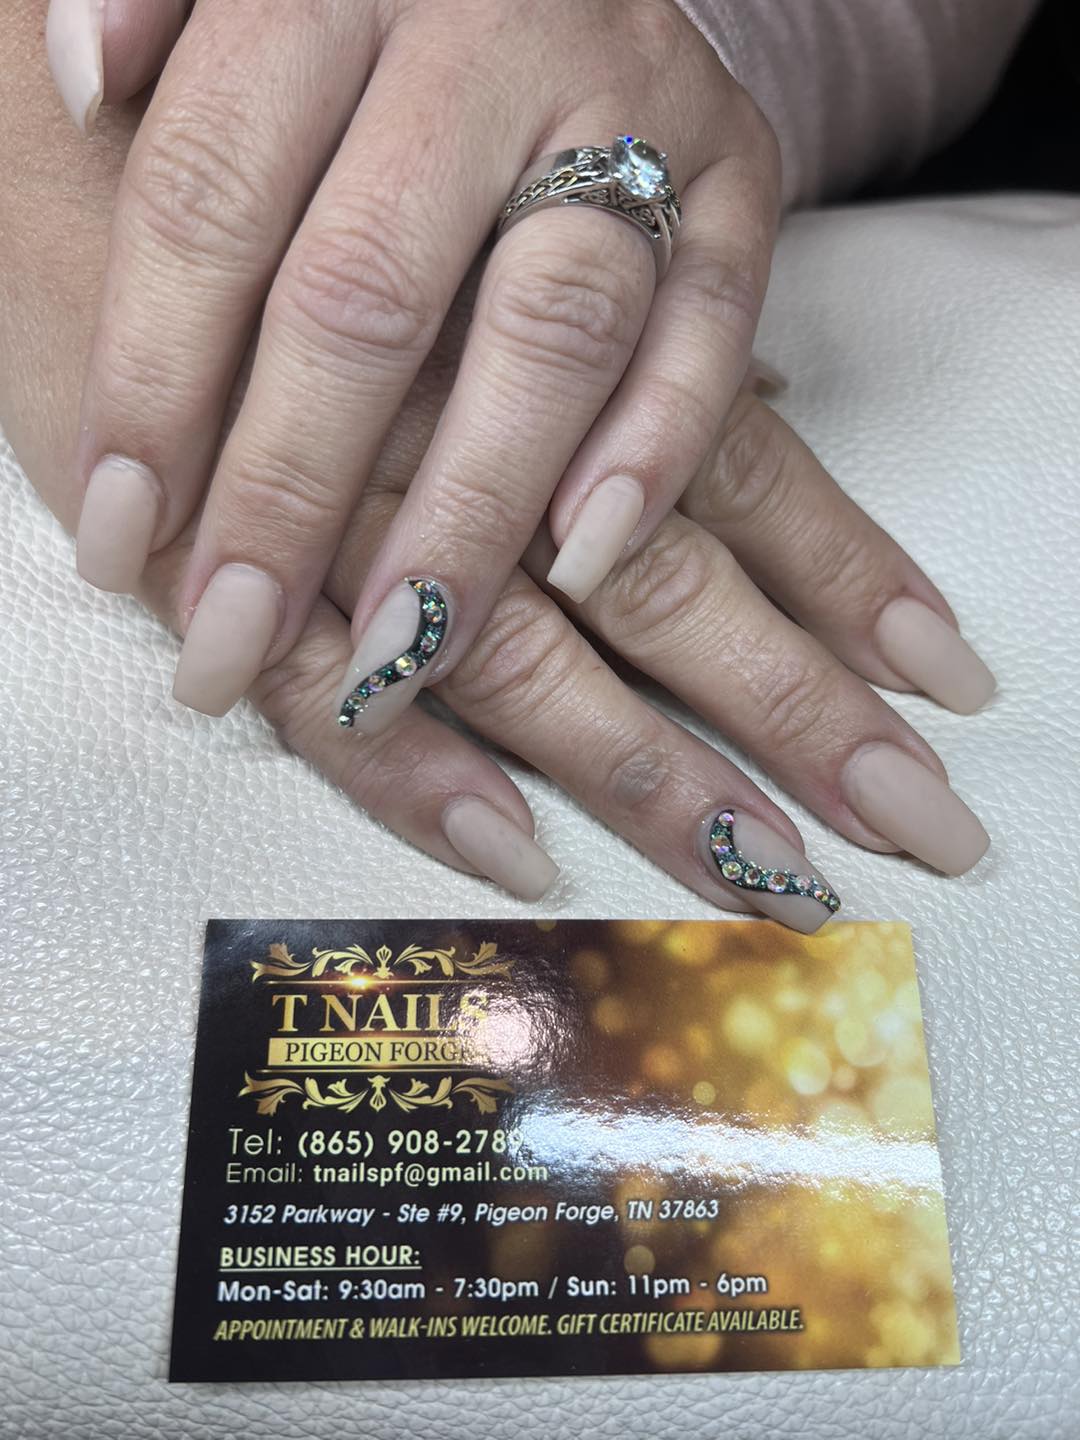 T Nails 3152 Parkway #9, Pigeon Forge Tennessee 37863